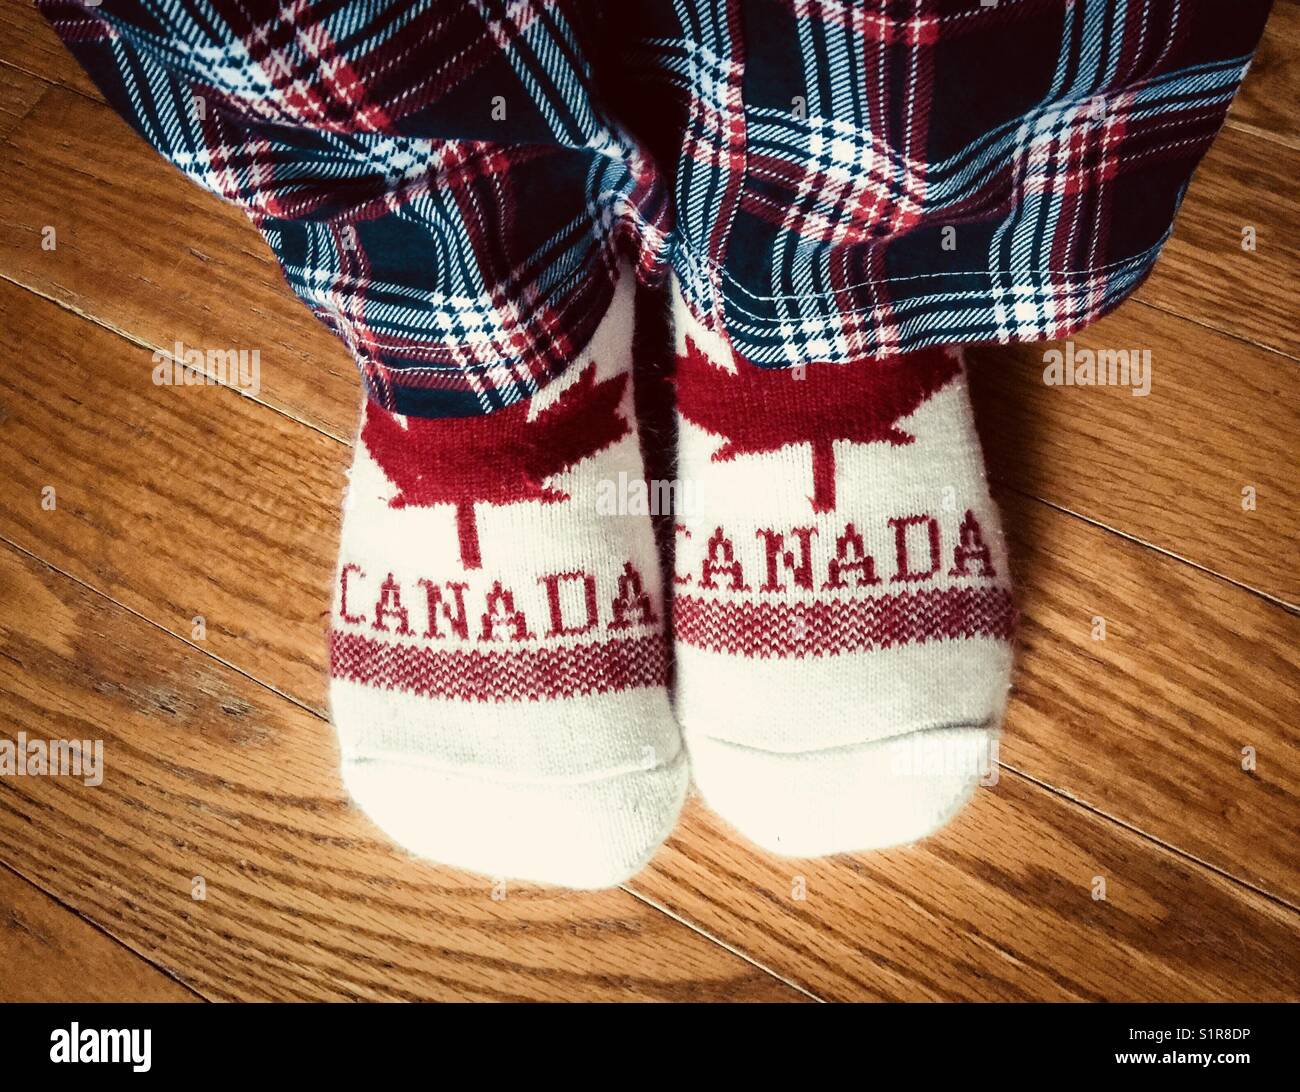 View of flannel plaid pyjama pants and Canada slipper socks being worn by person on hardwood floor Stock Photo